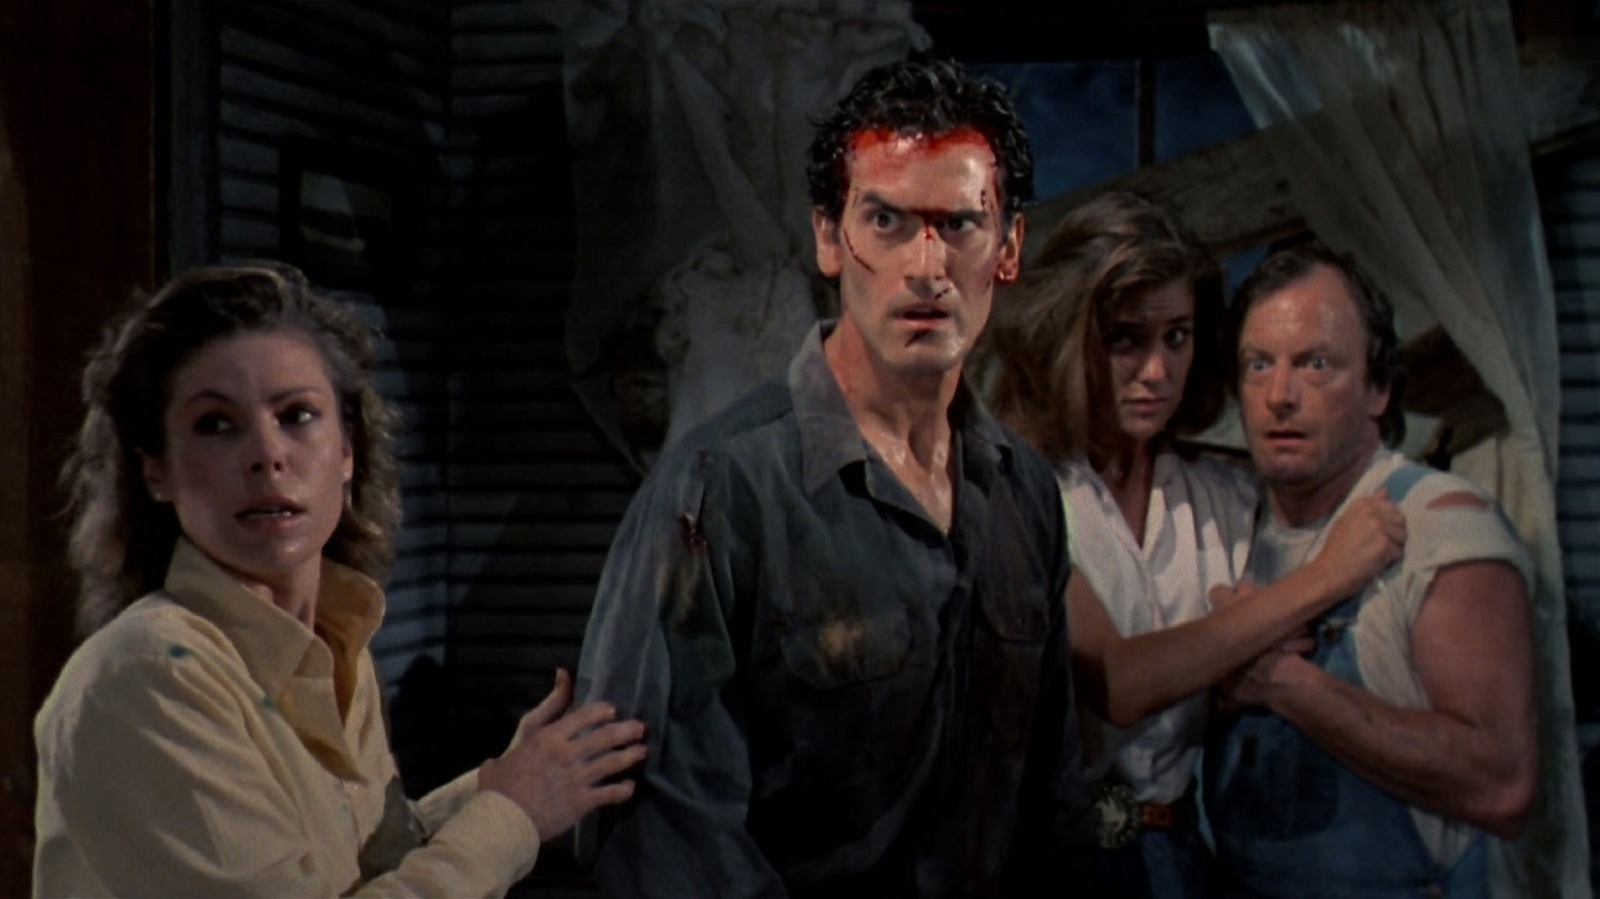 Annie (Sarah Berry), Ash (Bruce Campbell), Jake (Dan Hicks), and Bobby Joe (Kassie Wesley) stare, astonished, into pure evil in ‘Evil Dead II.’ 